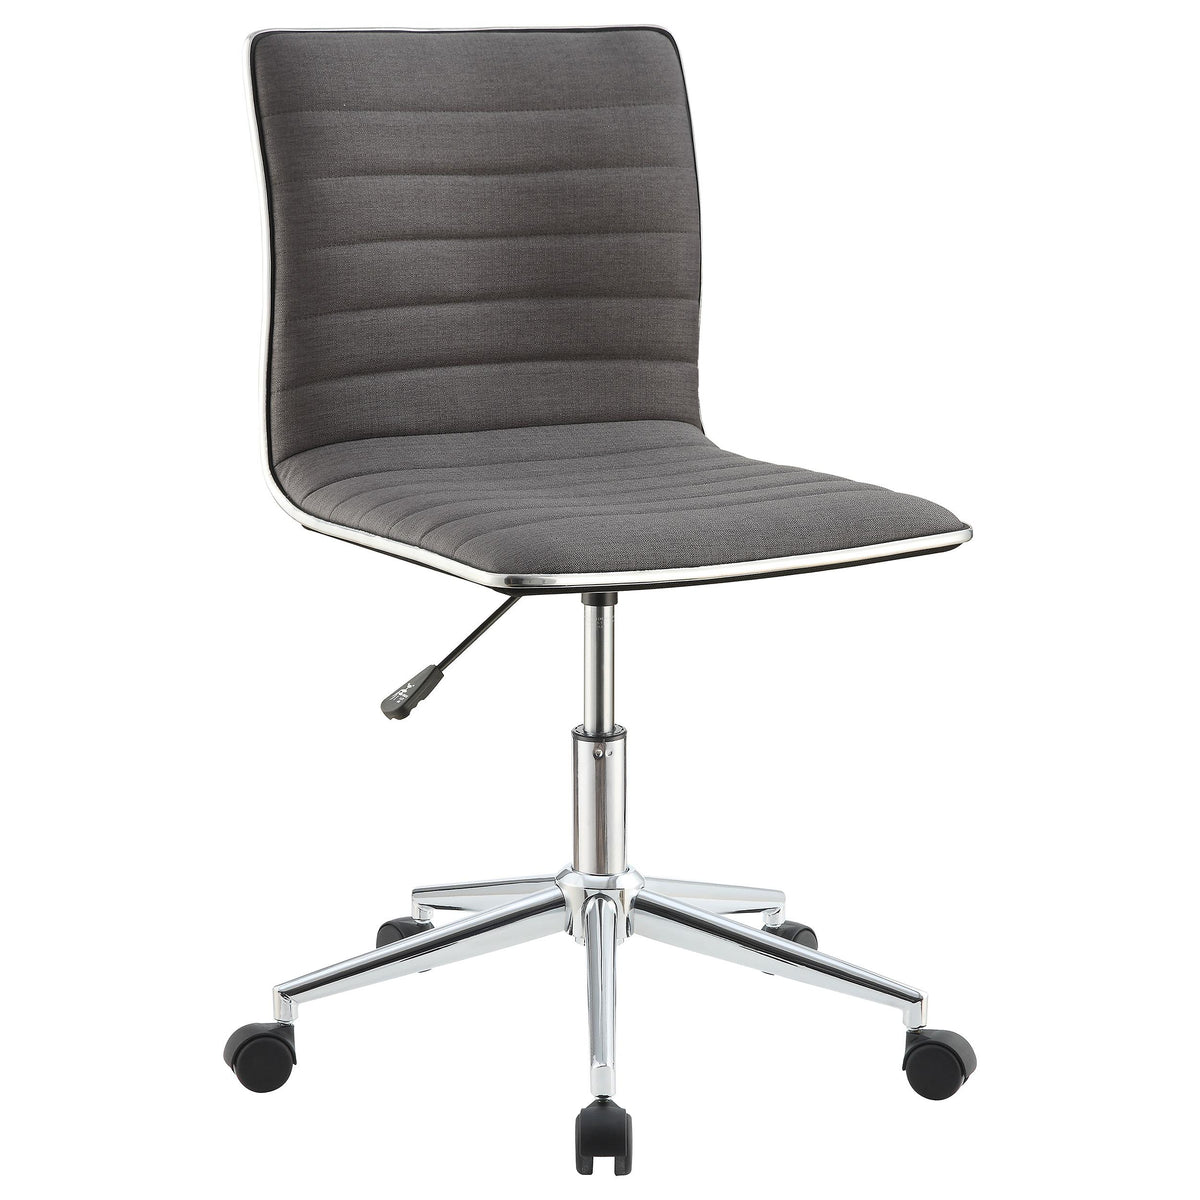 Chryses Adjustable Height Office Chair Grey and Chrome Chryses Adjustable Height Office Chair Grey and Chrome Half Price Furniture